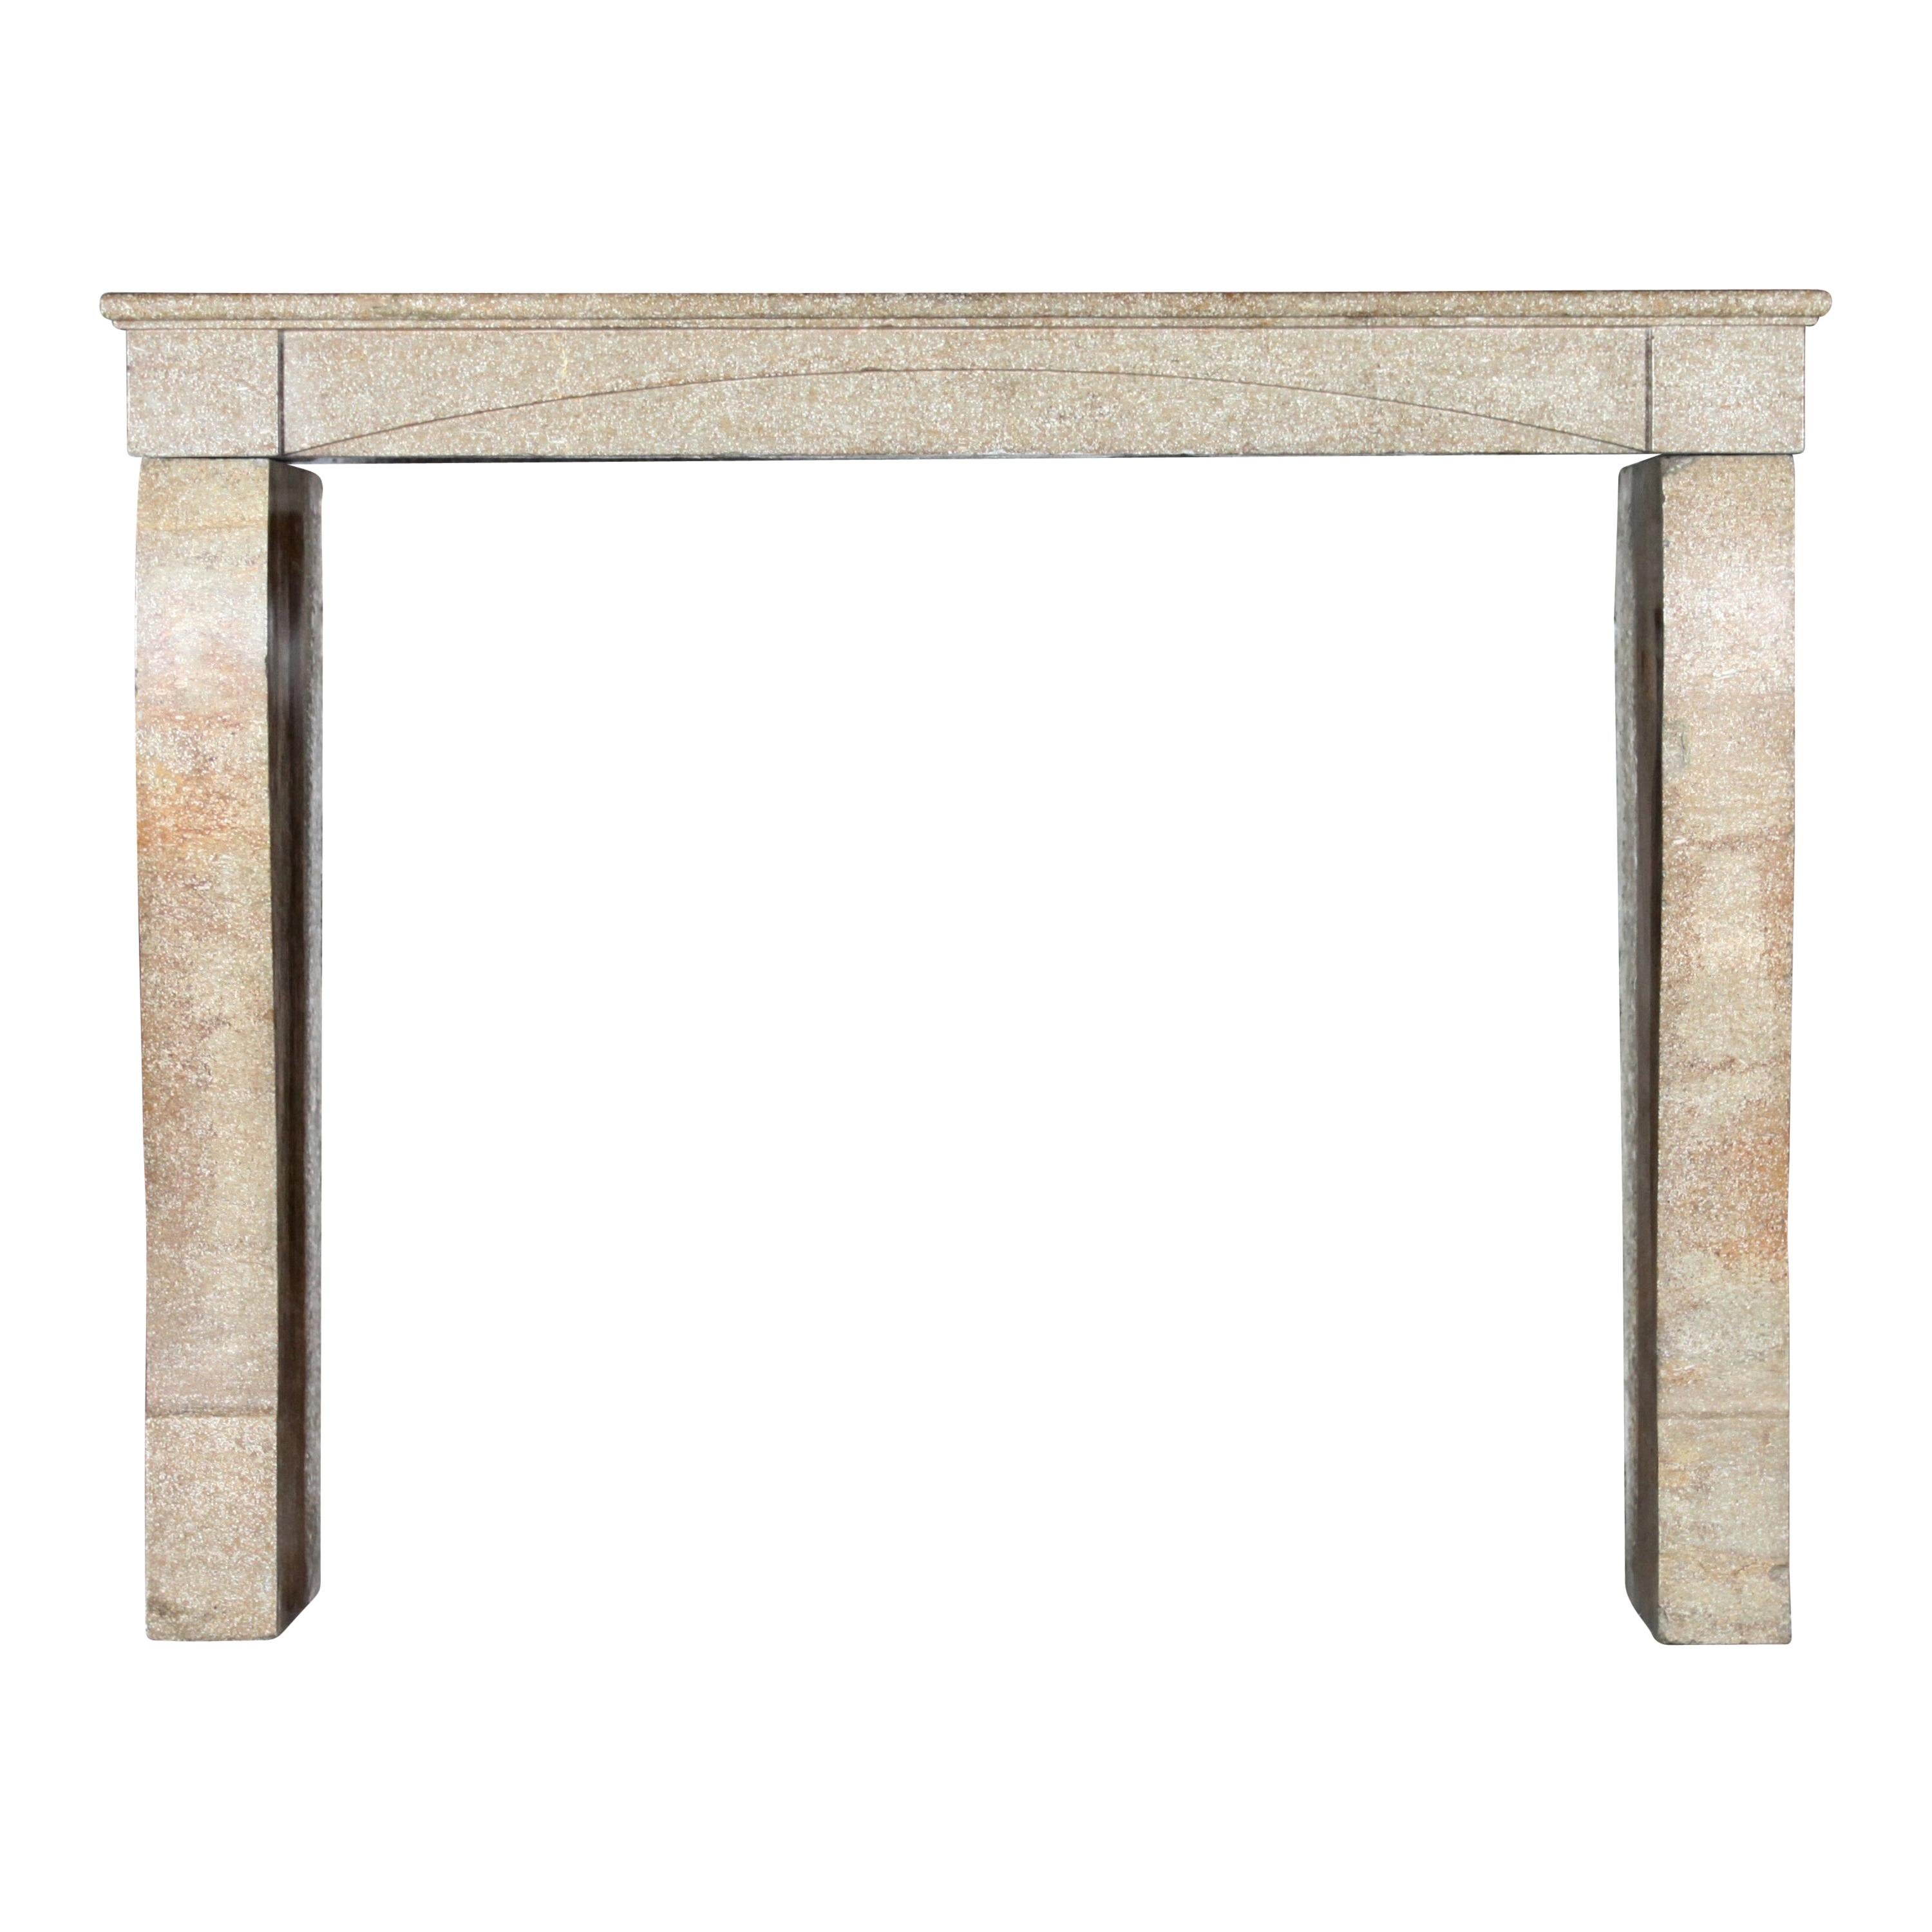 Fine French Country Limestone Vintage Fireplace Surround For Sale